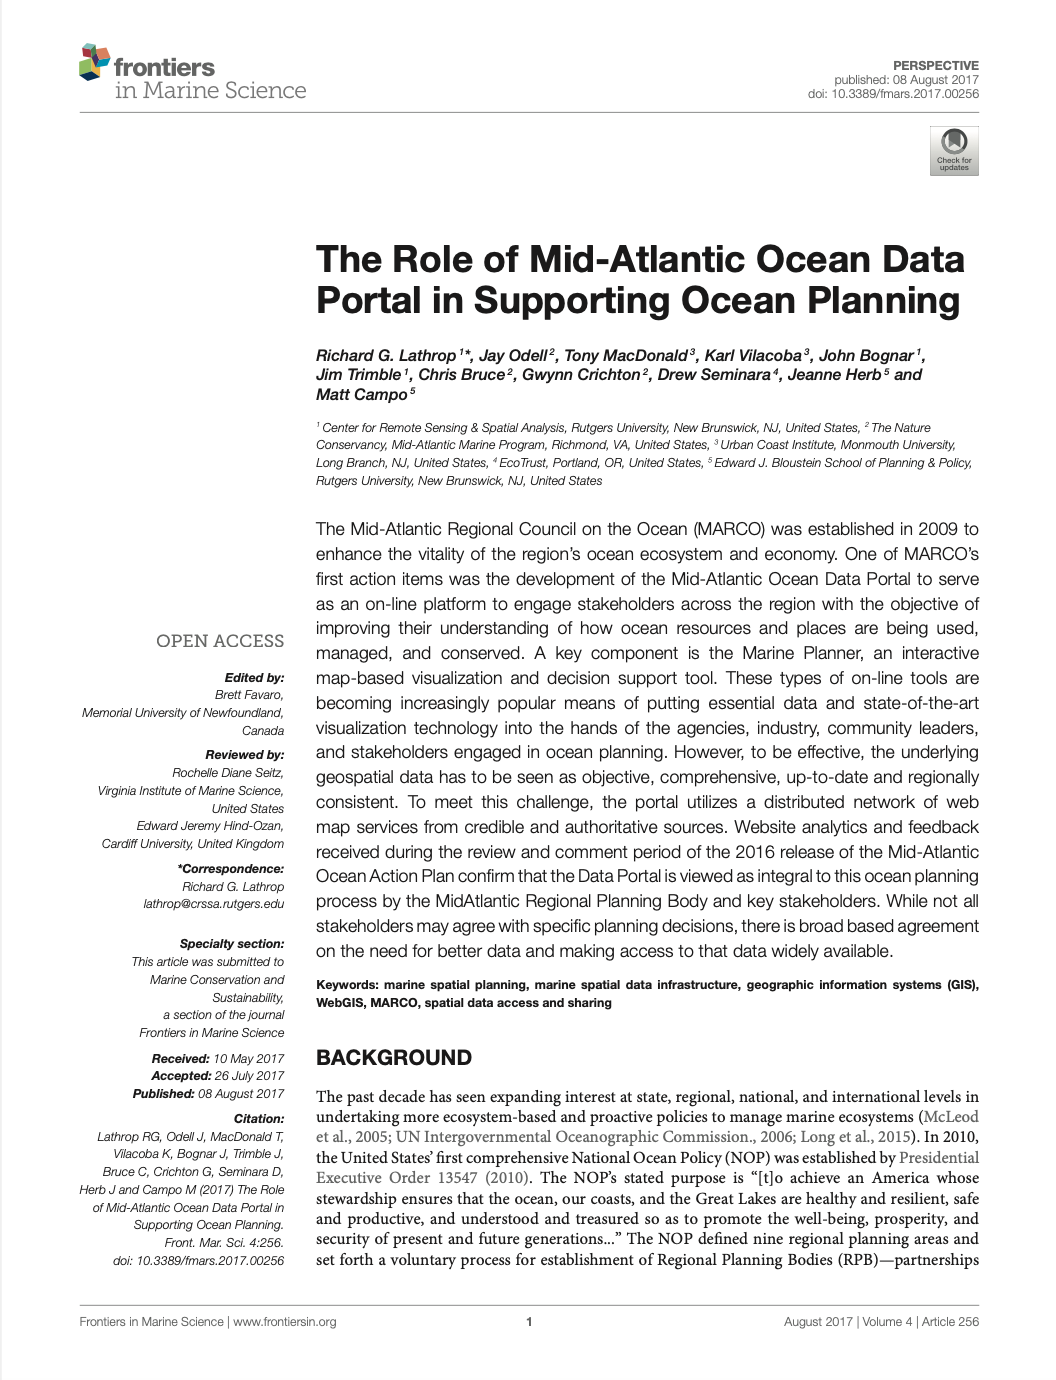 The Role of Mid-Atlantic Ocean Data Portal in Supporting Ocean Planning